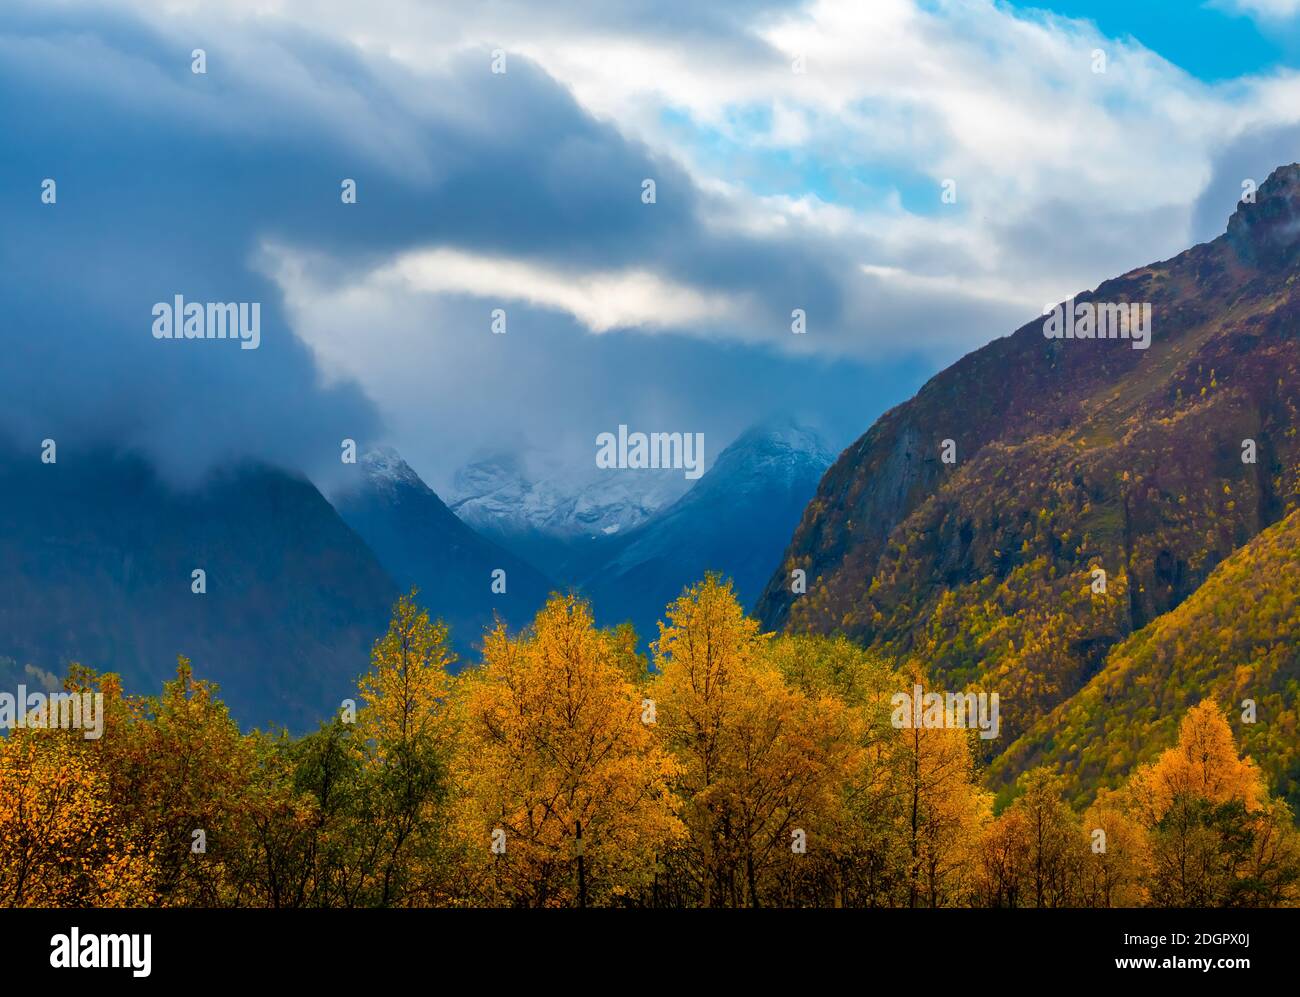 Valley with trees in autumn colors , dramatic cloud scape and mountain slopes and peaks in the distance.  Stock Photo